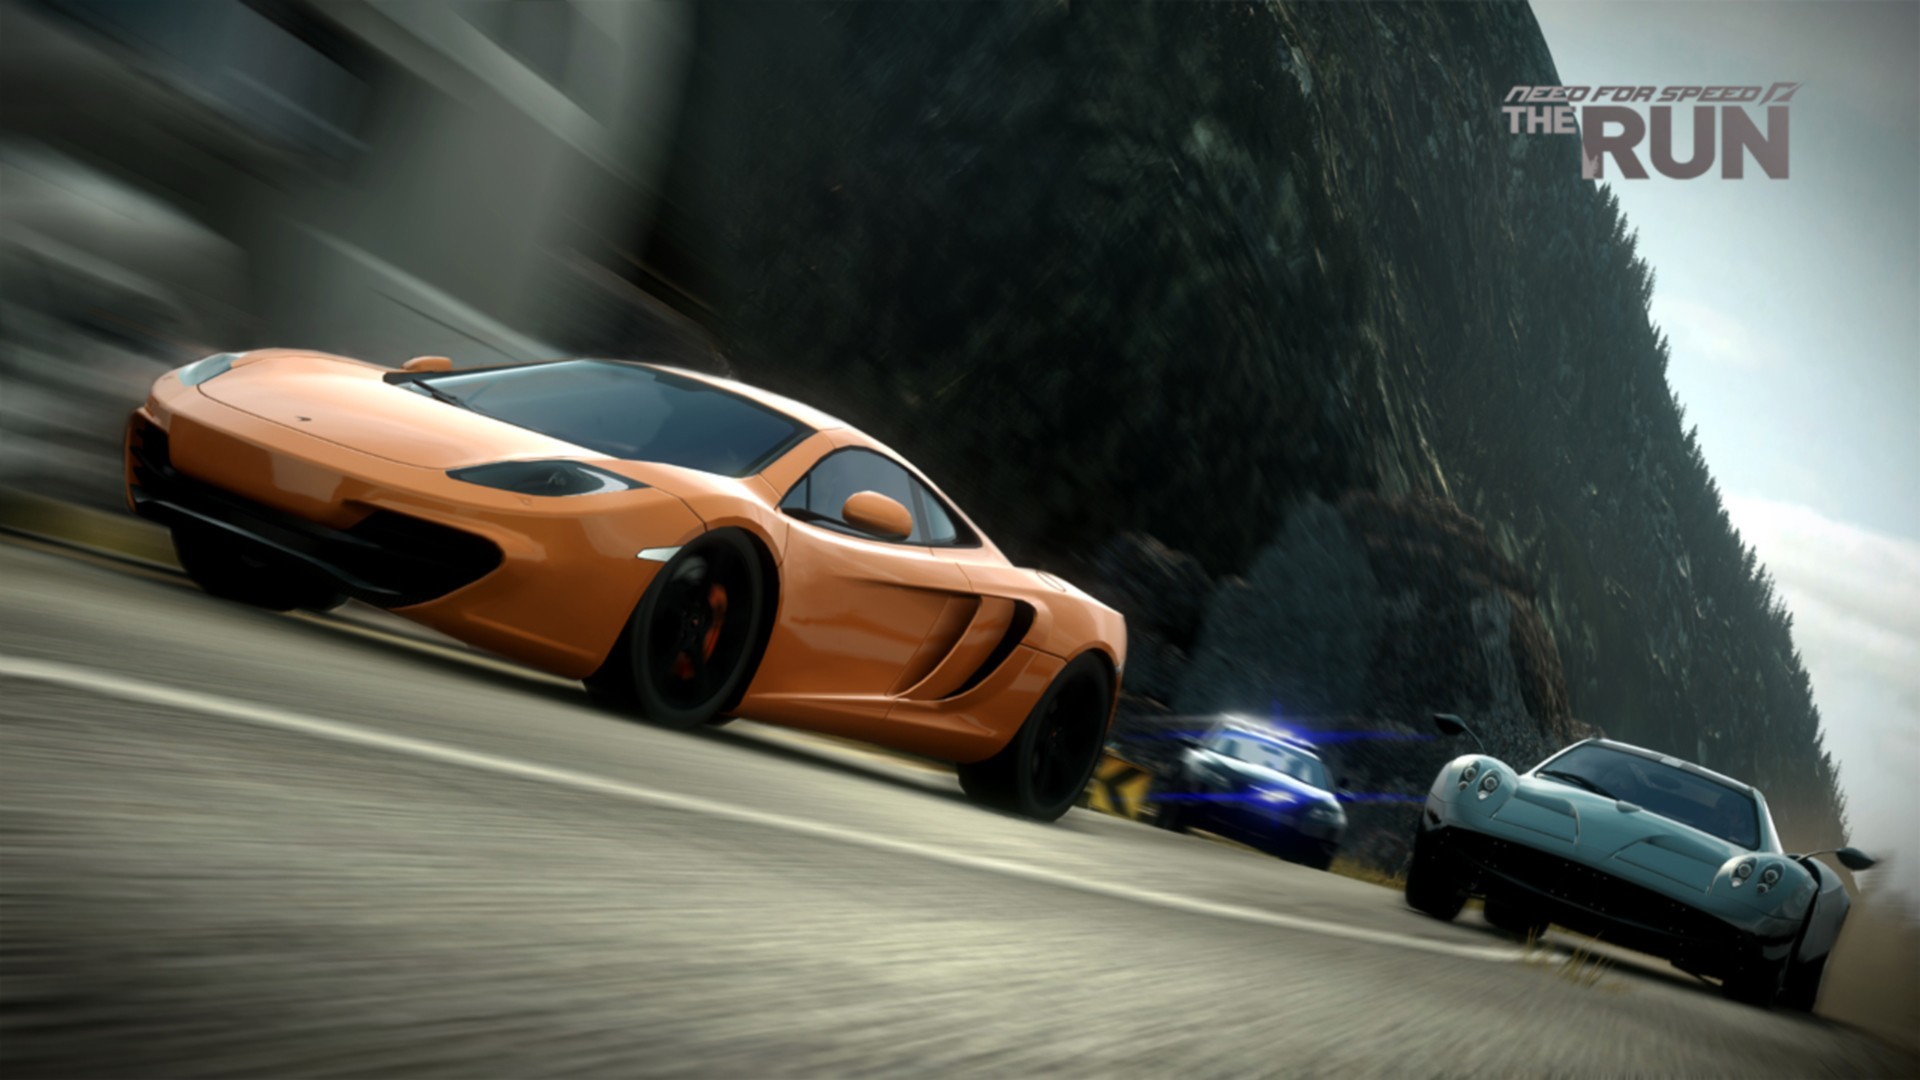 General 1920x1080 Need for Speed: The Run car vehicle racing orange cars video games